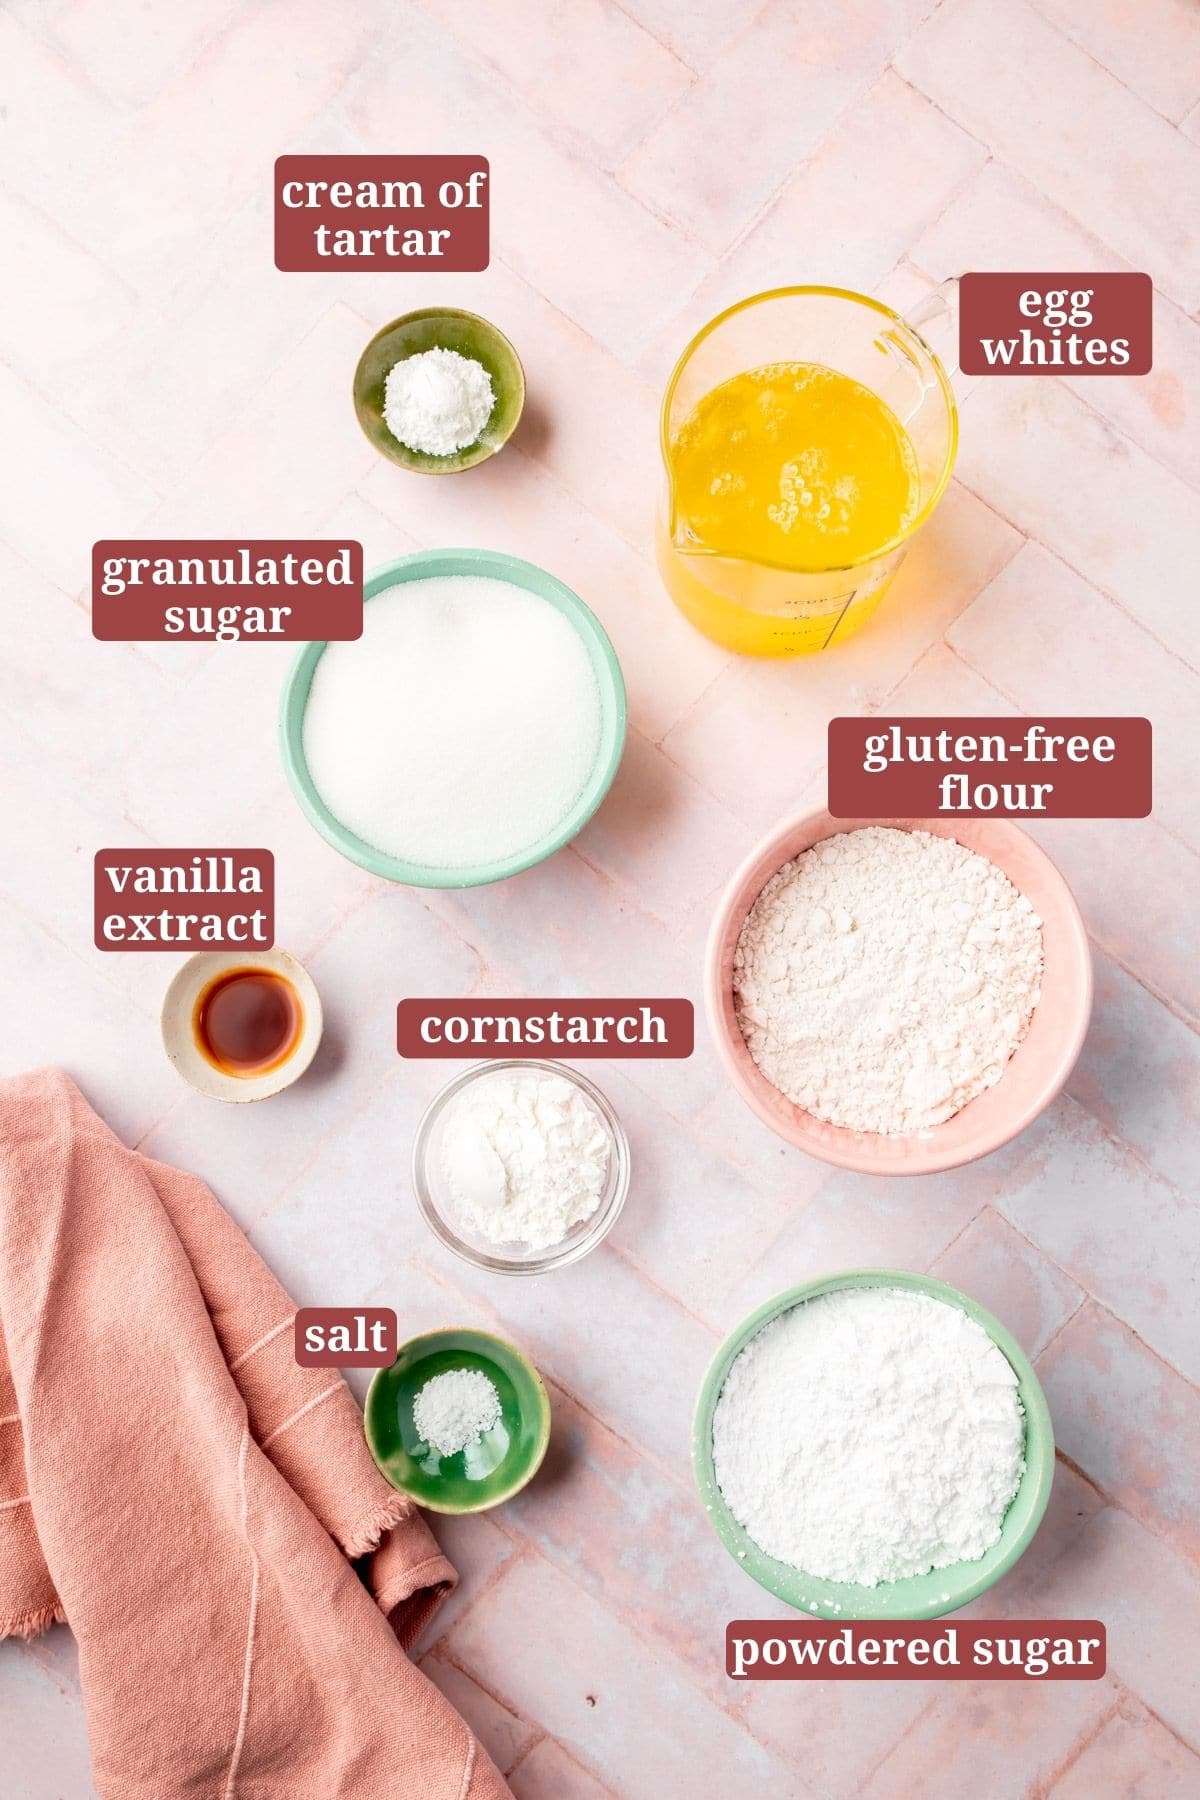 Infographic on ingredients in prep bowls for a gluten-free angel food cake.